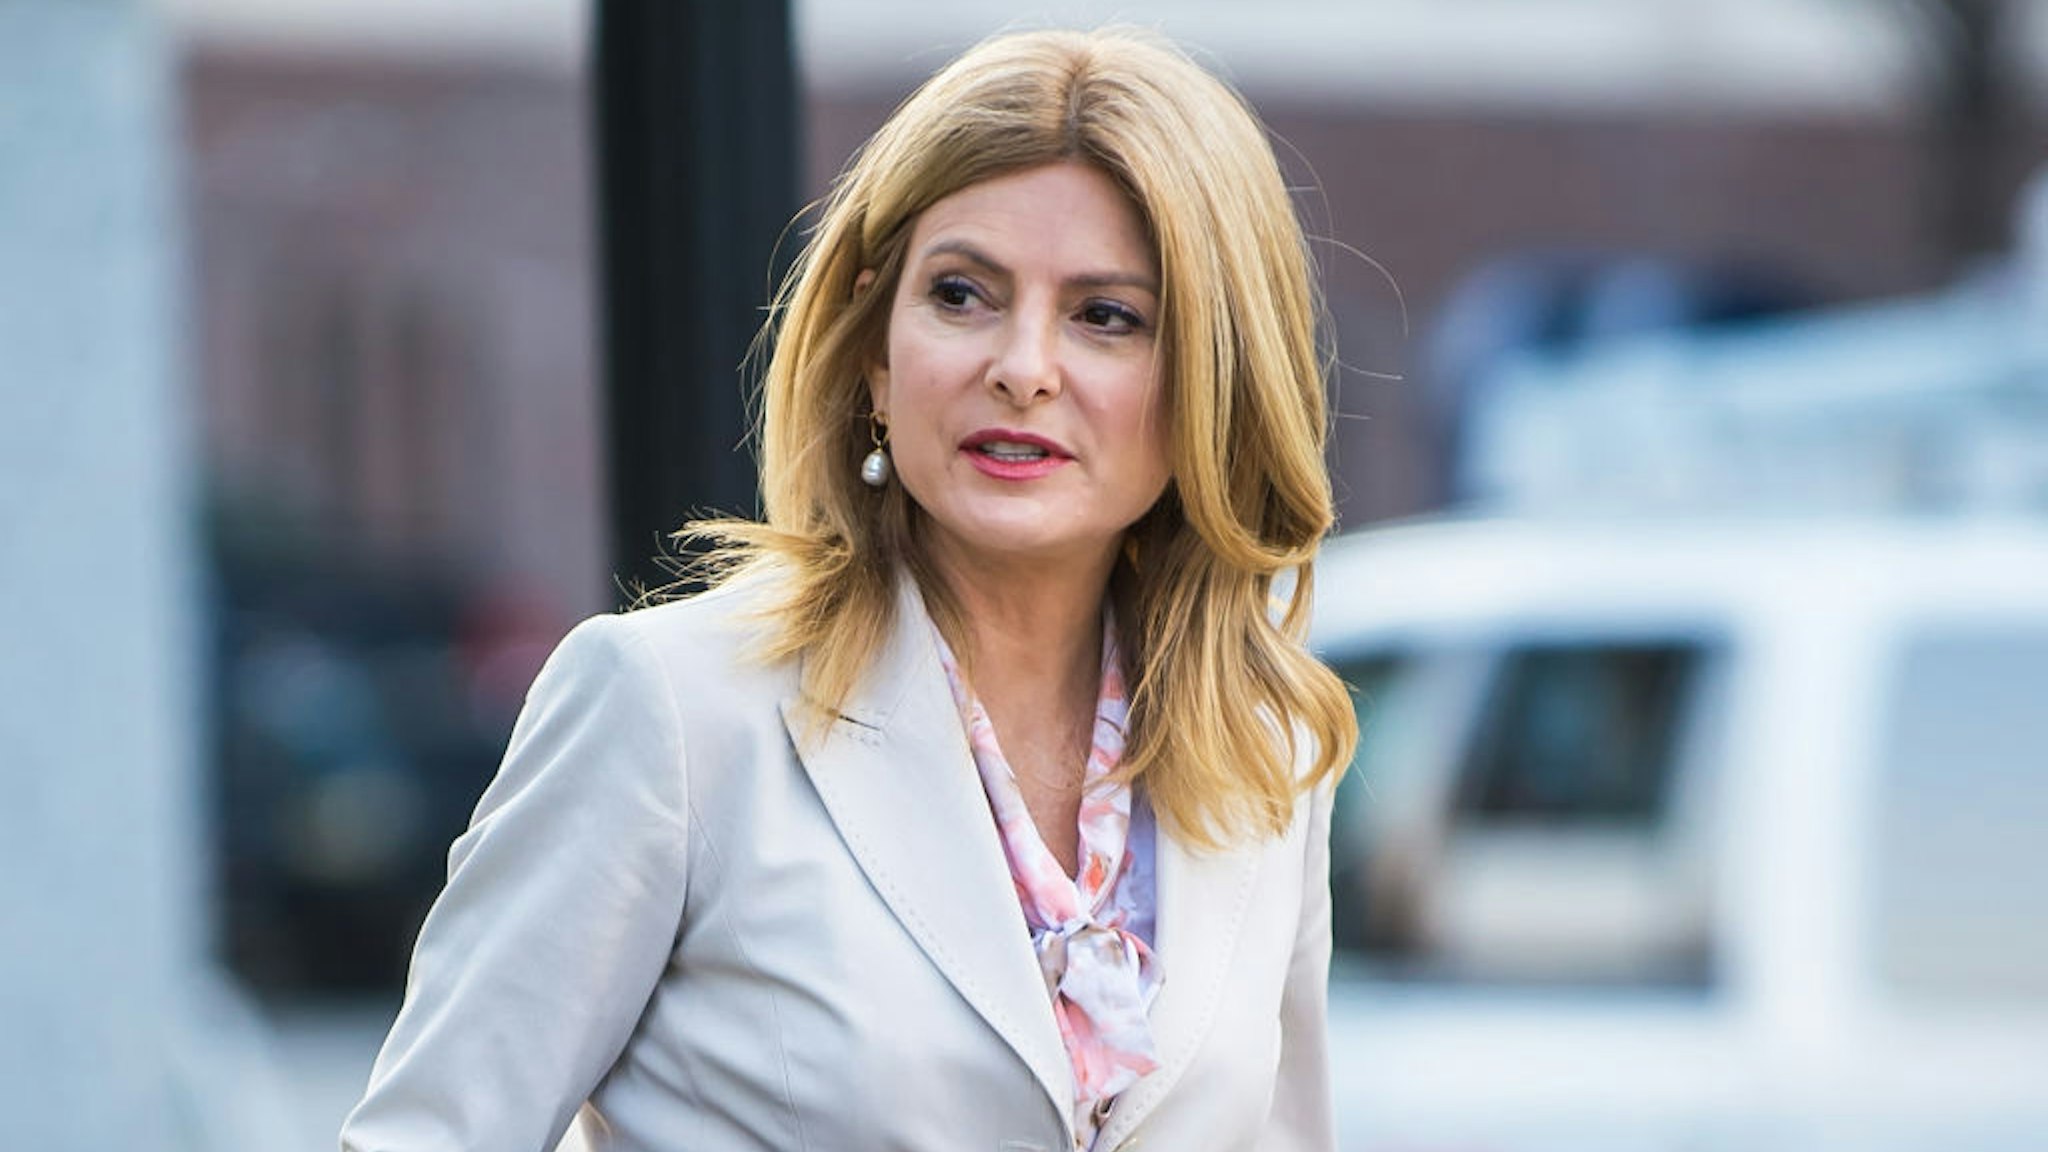 Civil rights attorney Lisa Bloom is seen around the Montgomery County Courthouse during the third day of Bill Cosby's sexual assault charges on April 11, 2018 in Norristown, Pennsylvania.